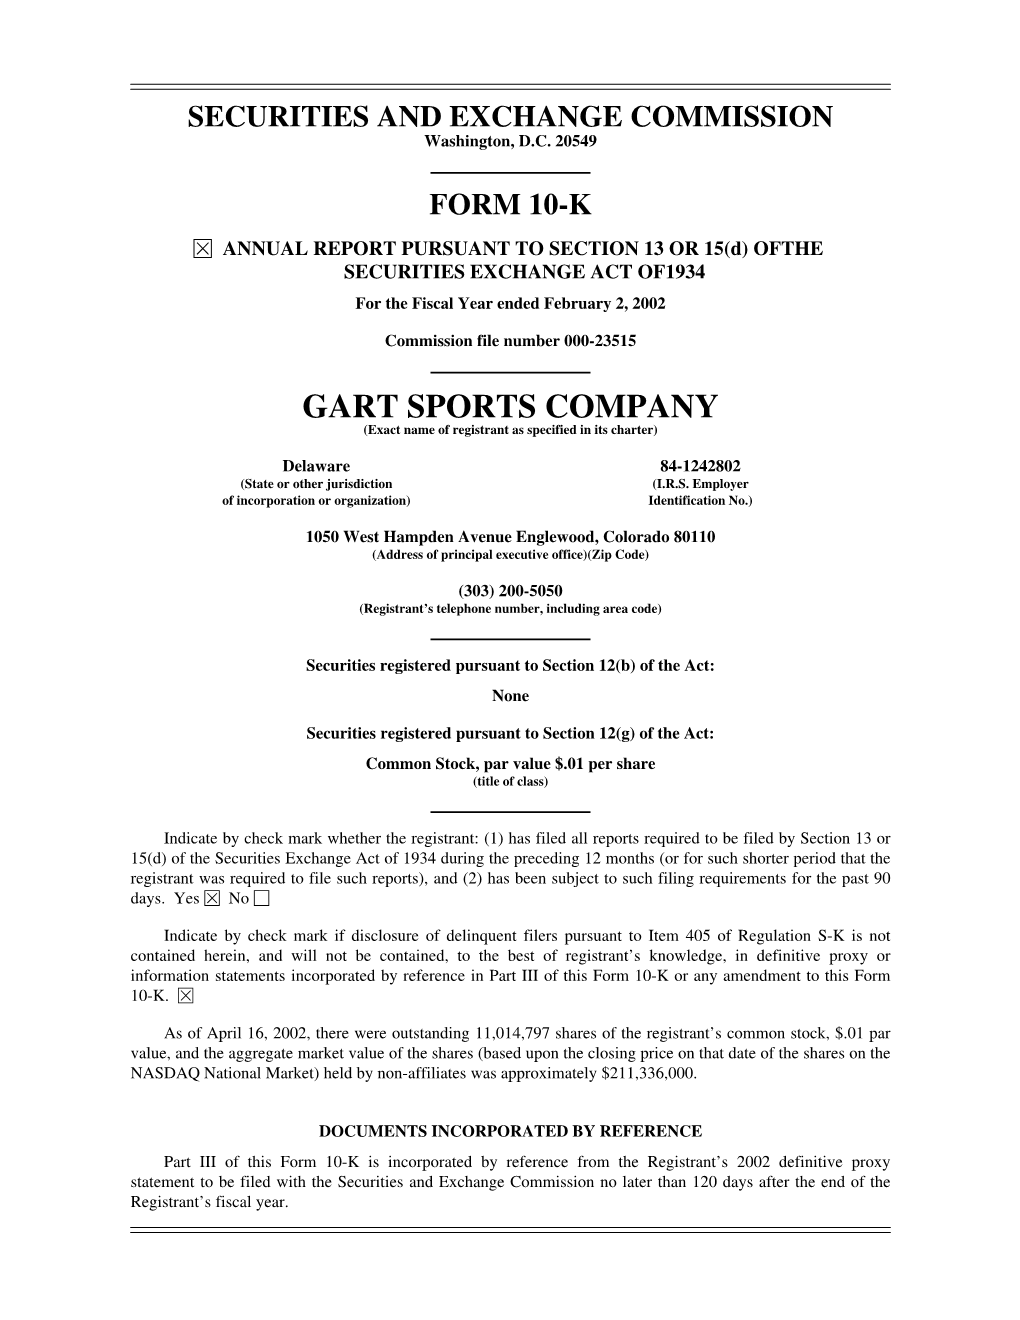 GART SPORTS COMPANY (Exact Name of Registrant As Specified in Its Charter)